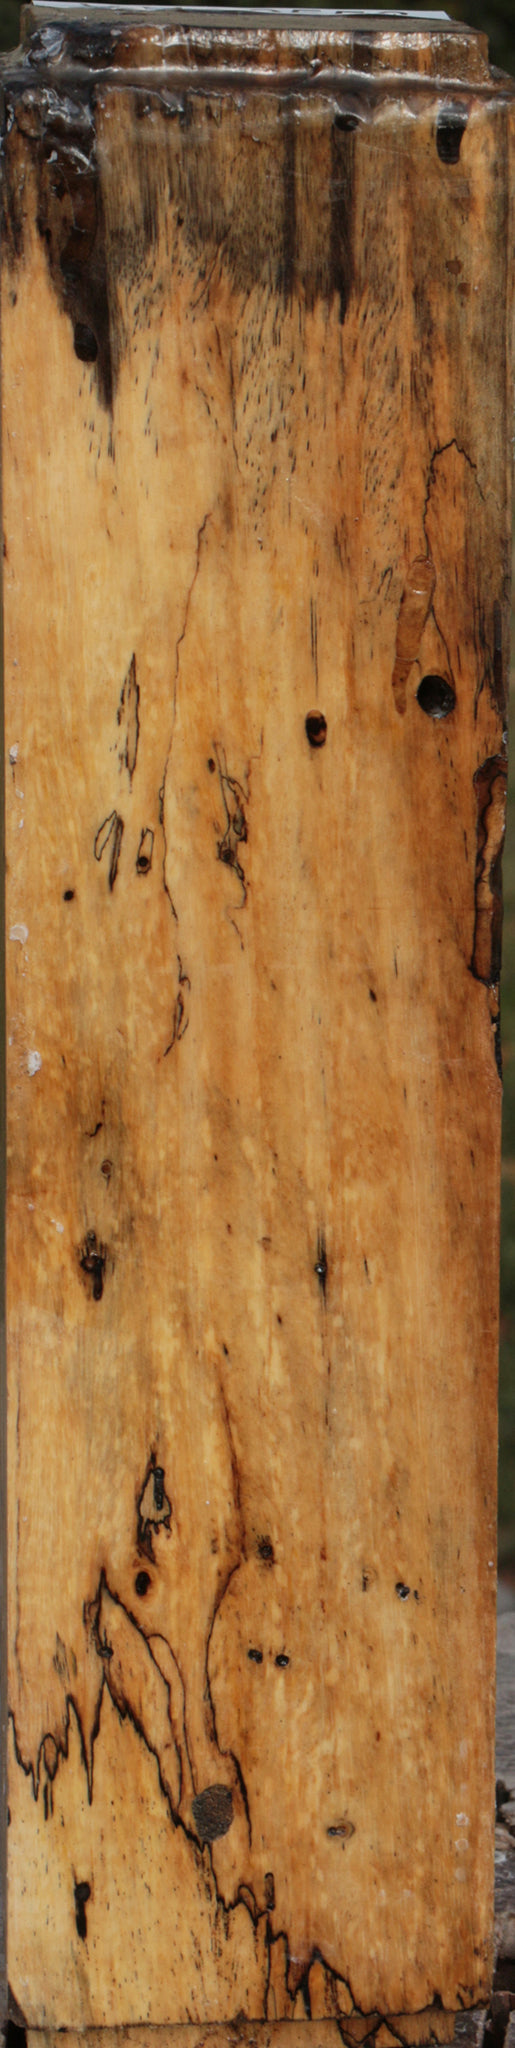 Spalted Tamarind Peppermill